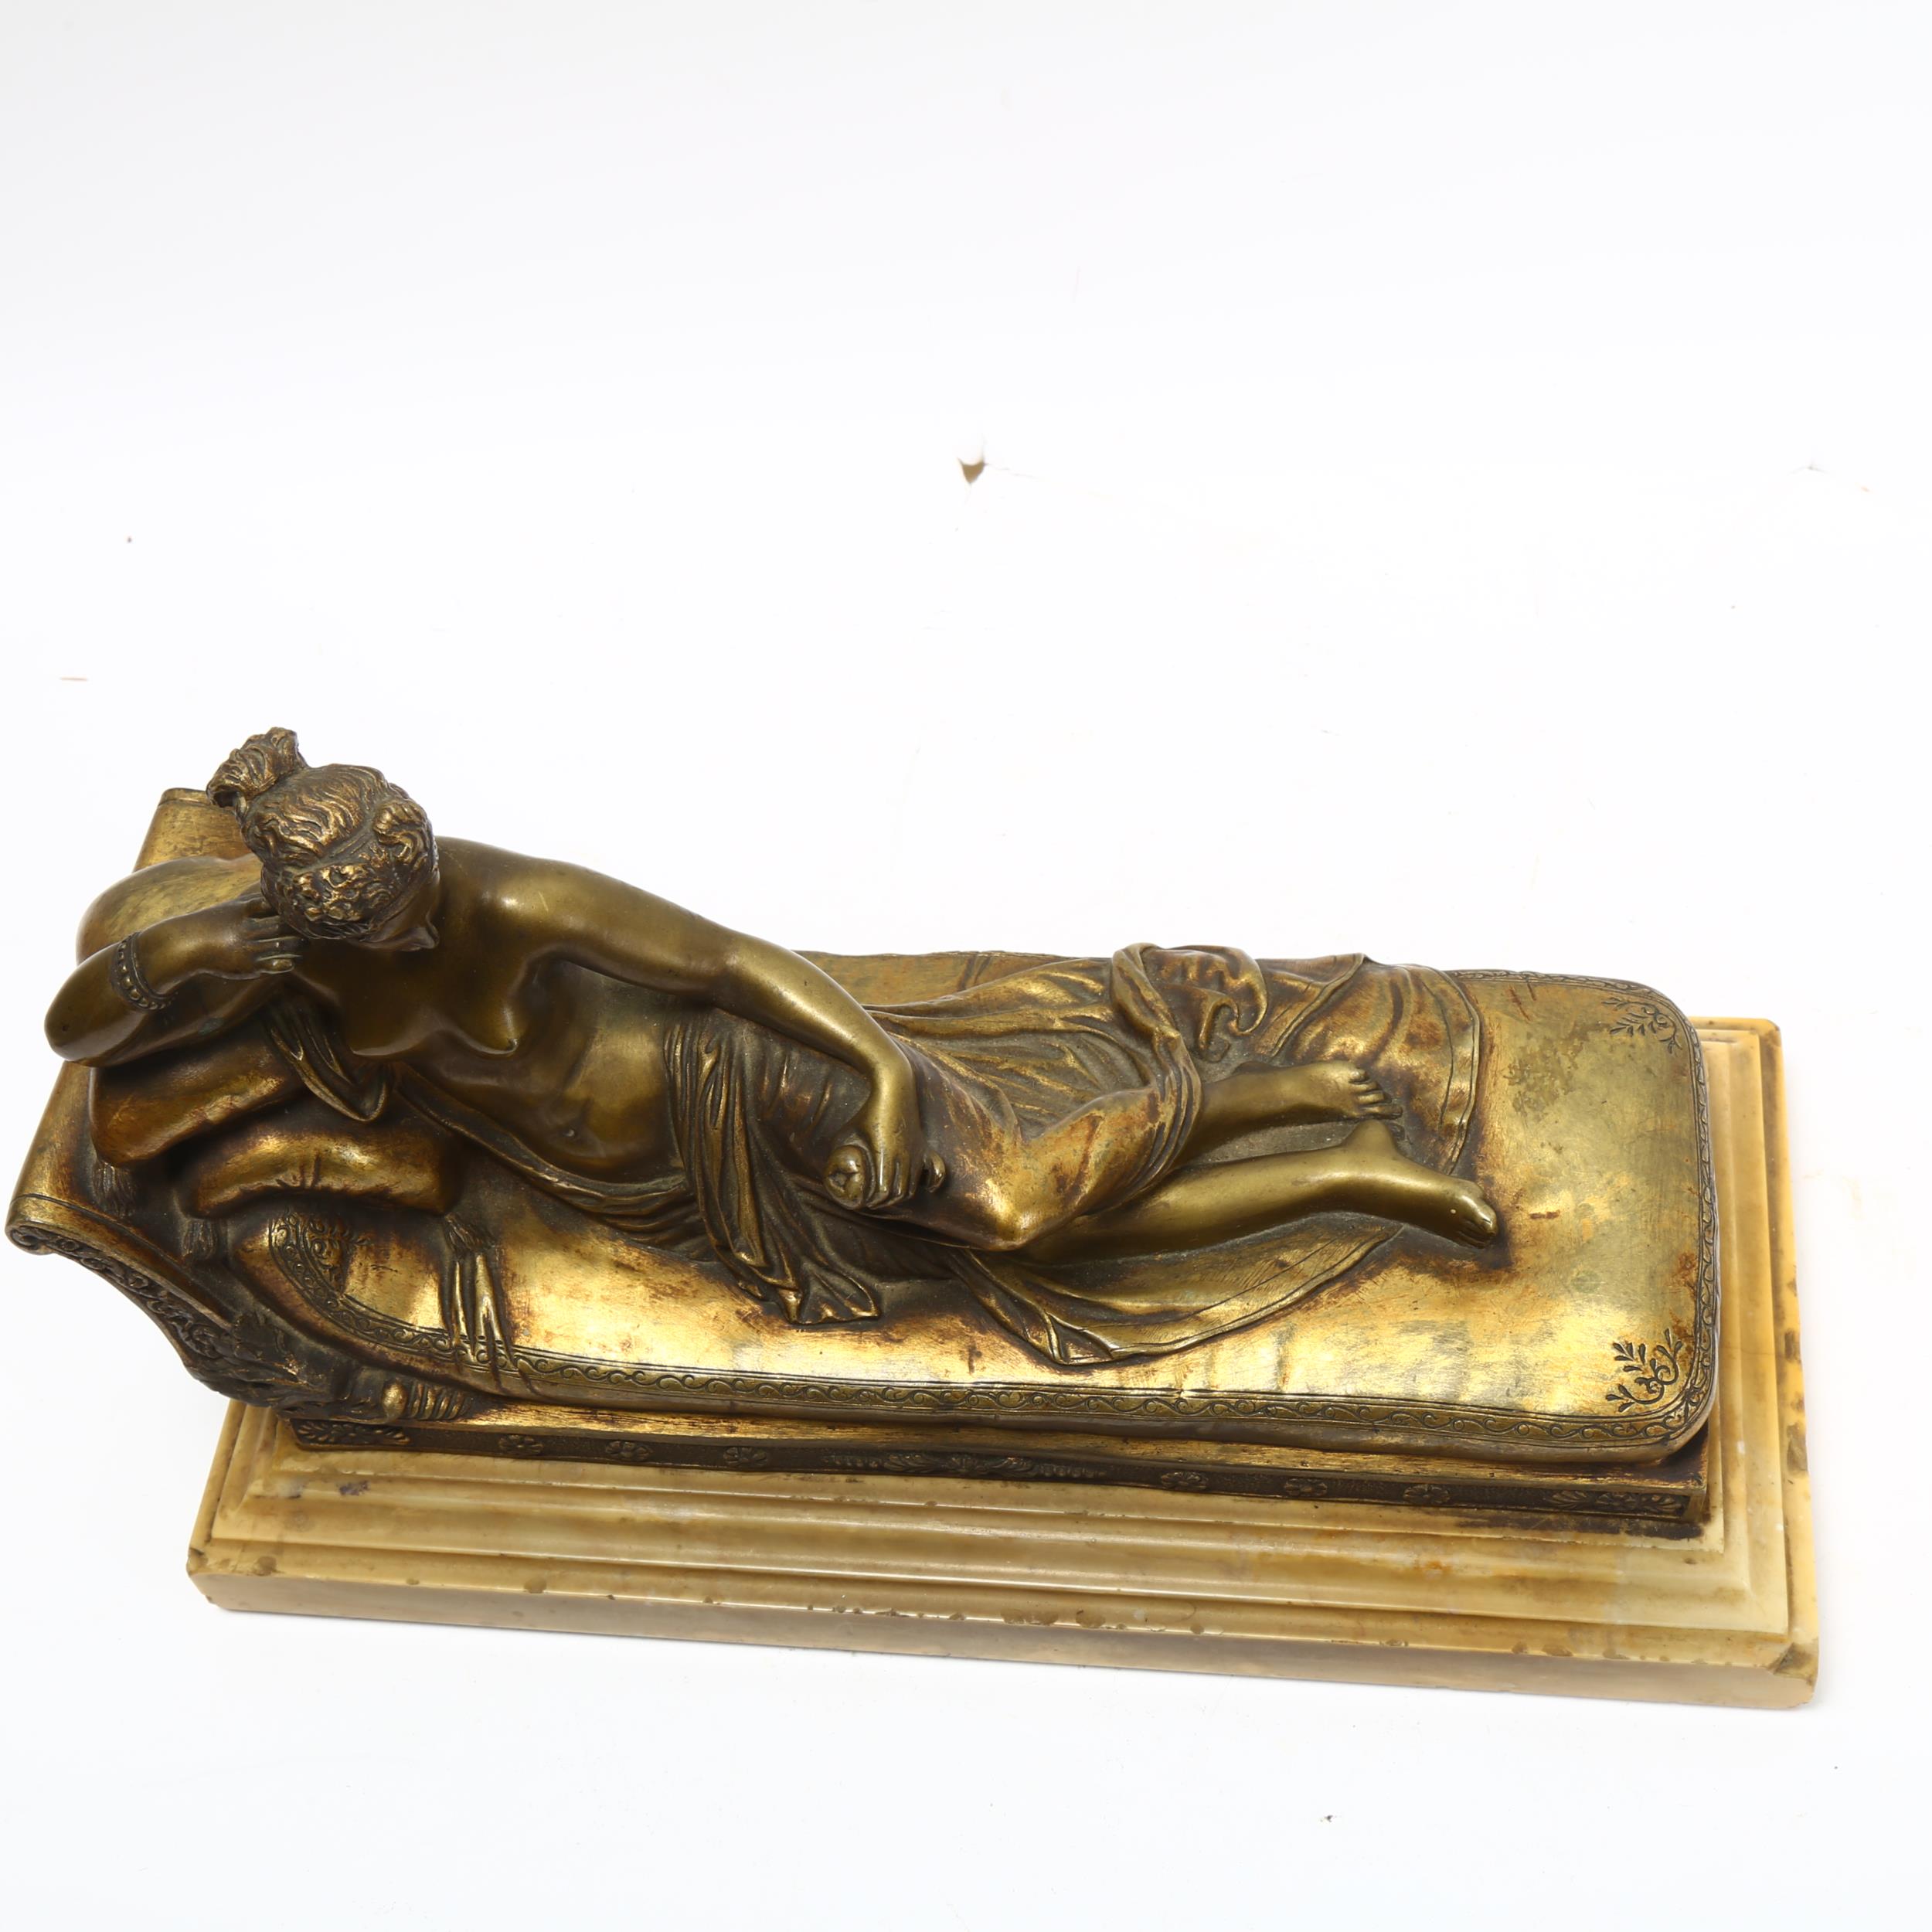 French 19th century gilded bronze figure of Venus after Canova, unsigned with Paris foundry mark, on - Image 2 of 3